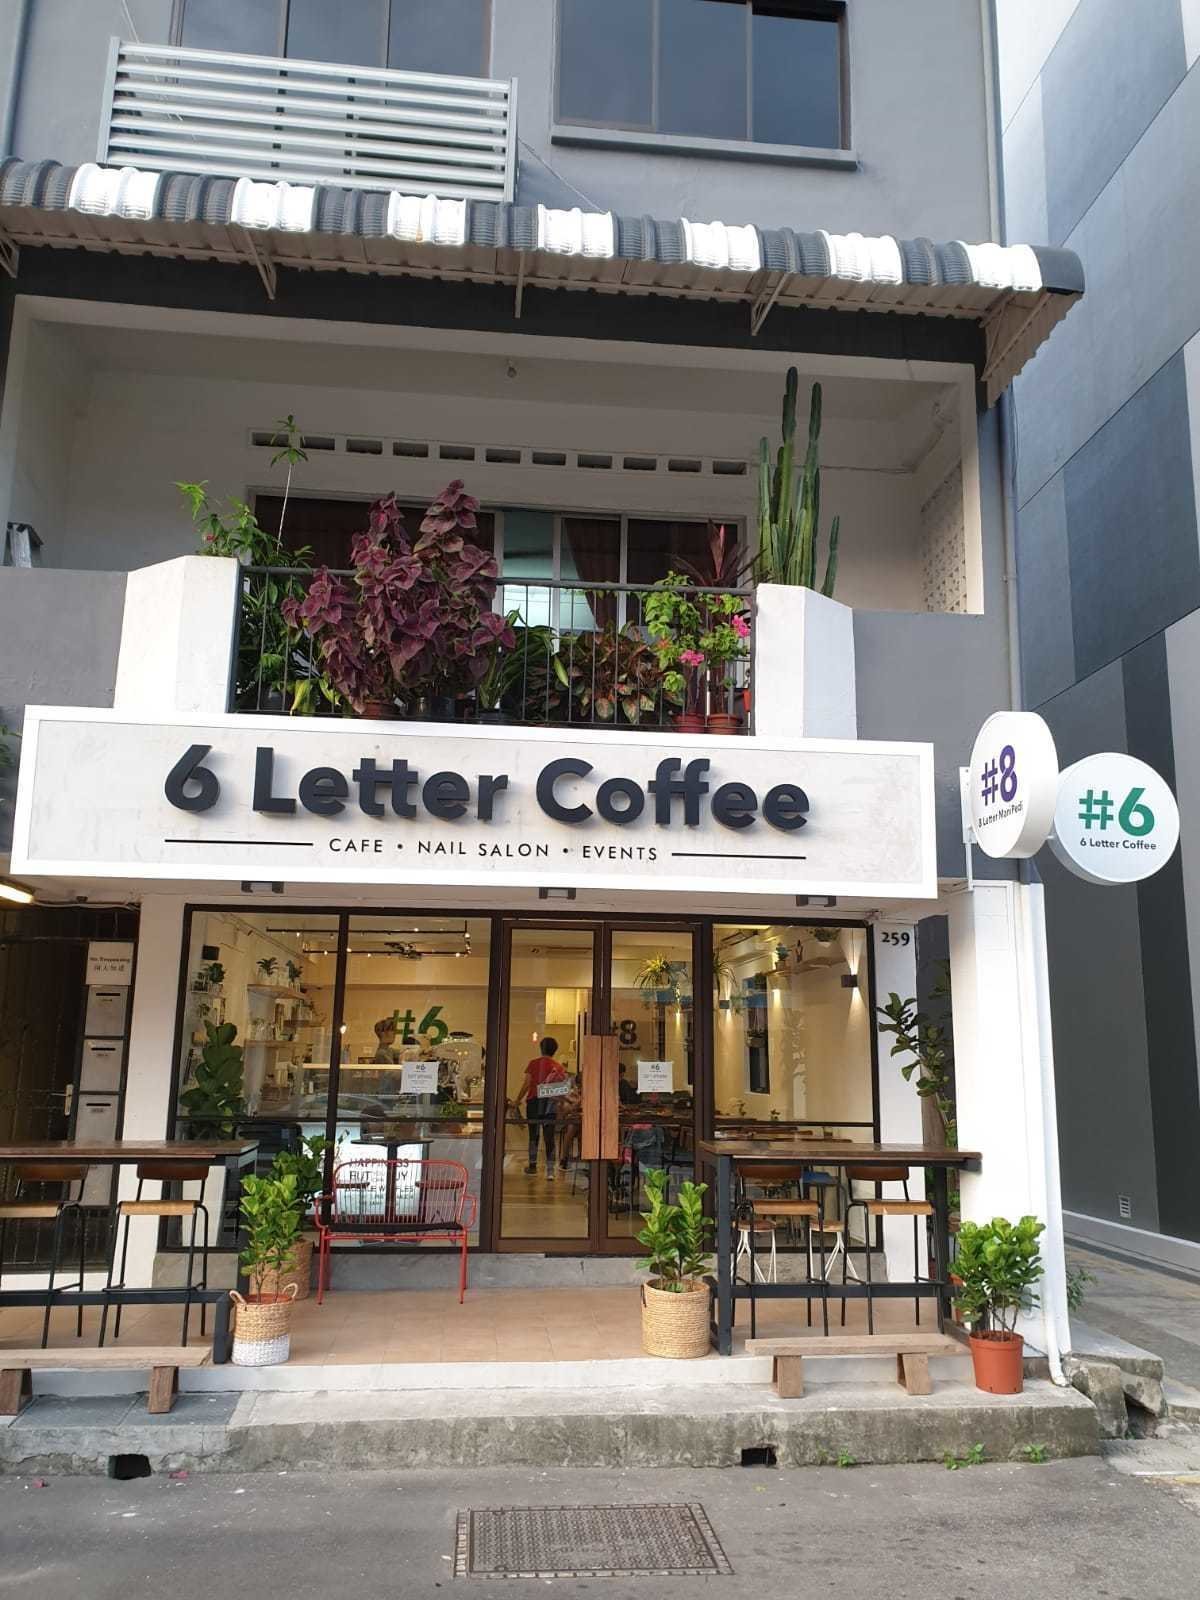 <span class="translation_missing" title="translation missing: en.meta.location_title, location_name: 6 Letter Coffee, city: Singapore">Location Title</span>